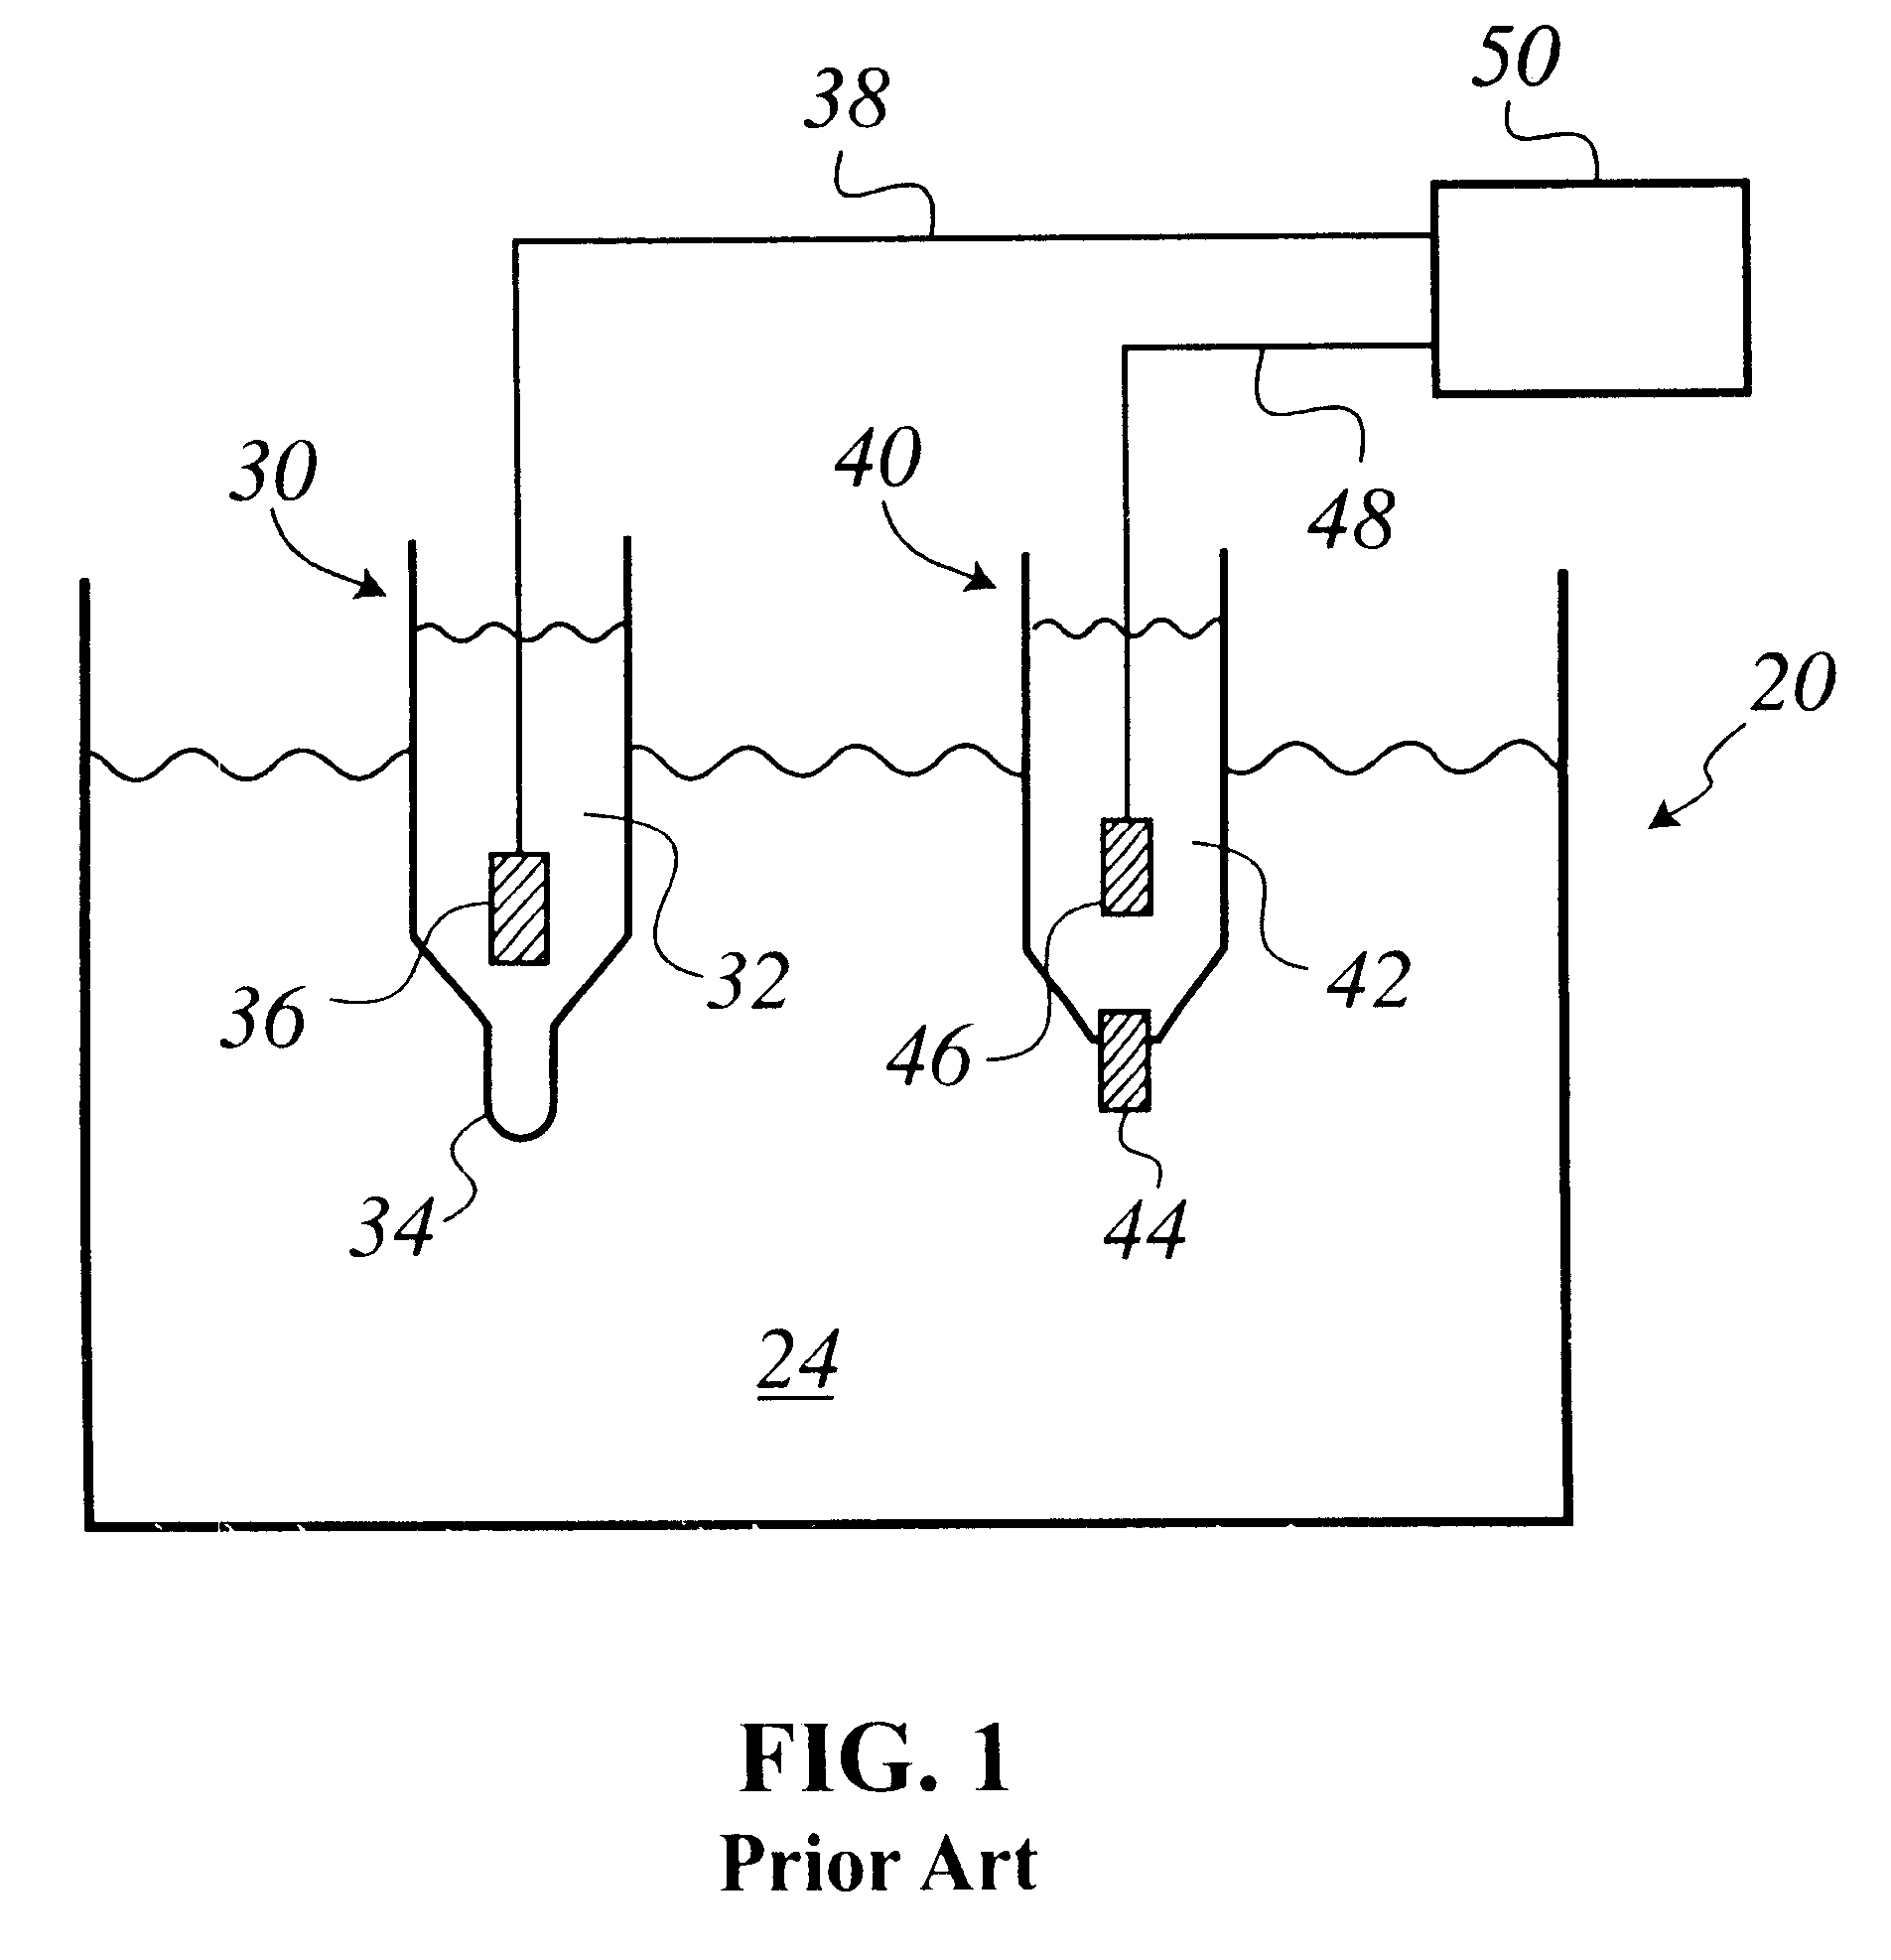 Replaceable reference junction including an ion-barrier for an electrochemical sensor